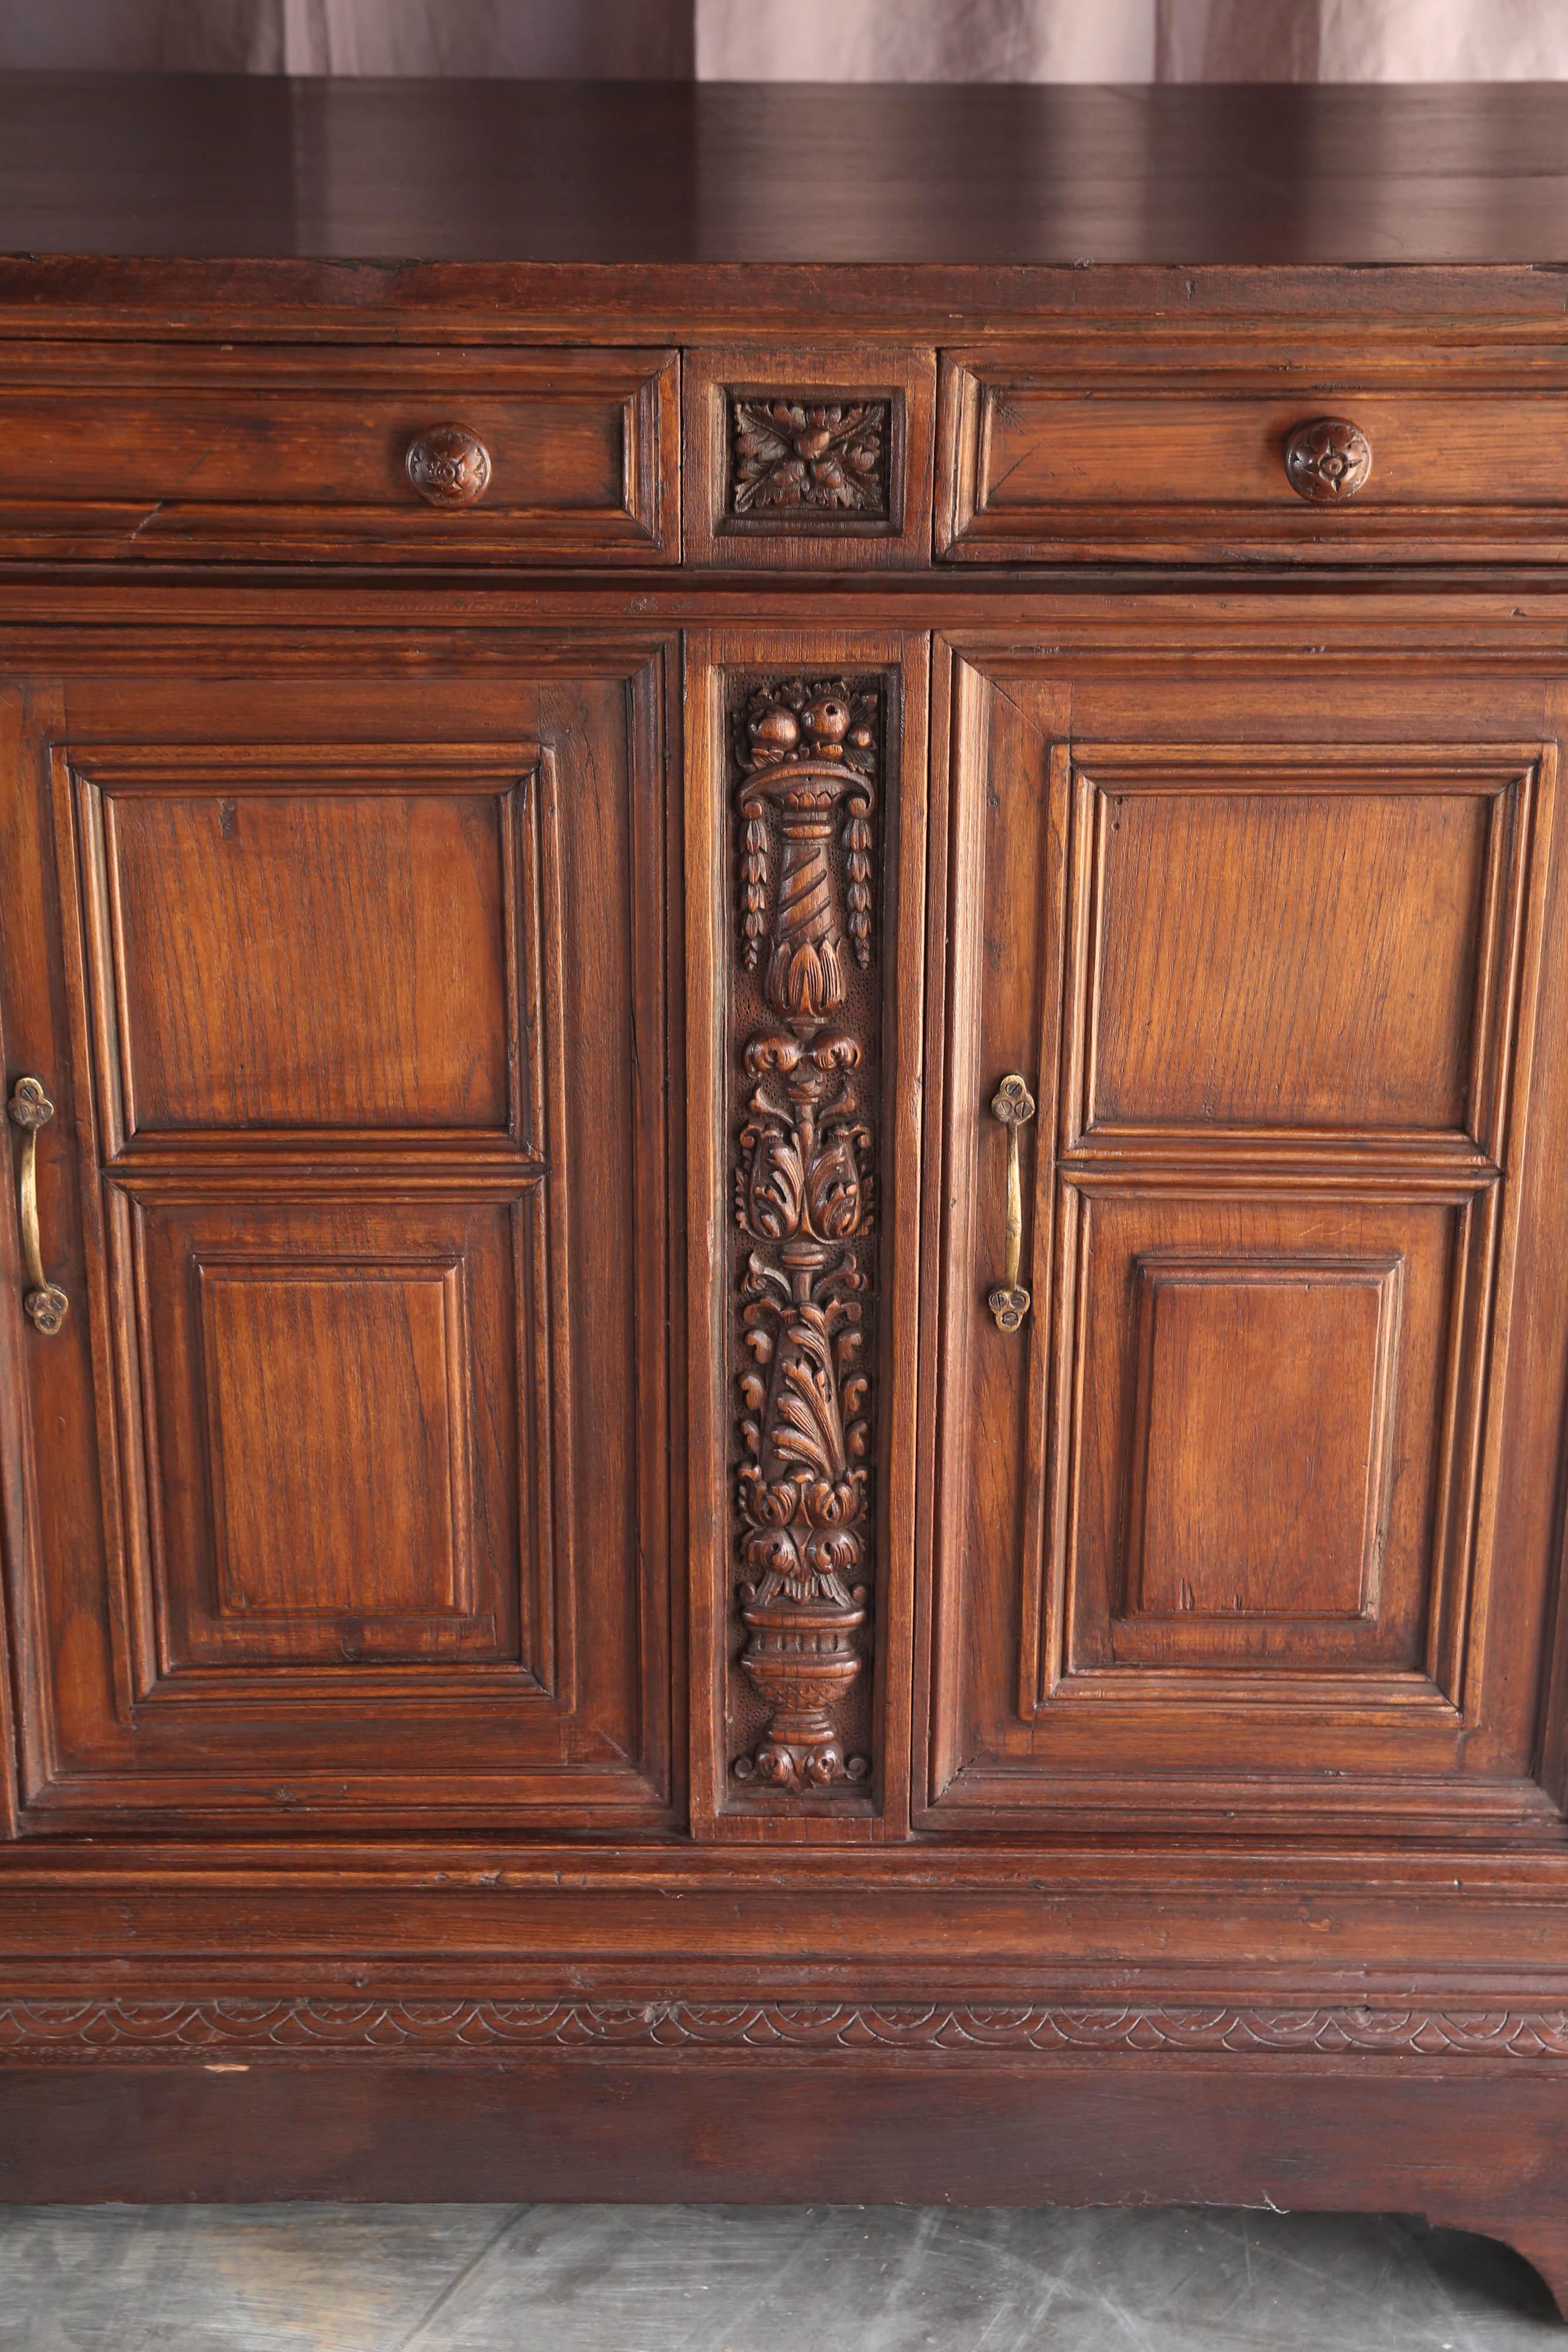 Very fine dense teak wood is used in making this unique entry hall piece. It comes from a French colony in Asia. The carvings on this piece are crisp and precise. It has three upper drawers and four doors for the shelves. It retains original cast